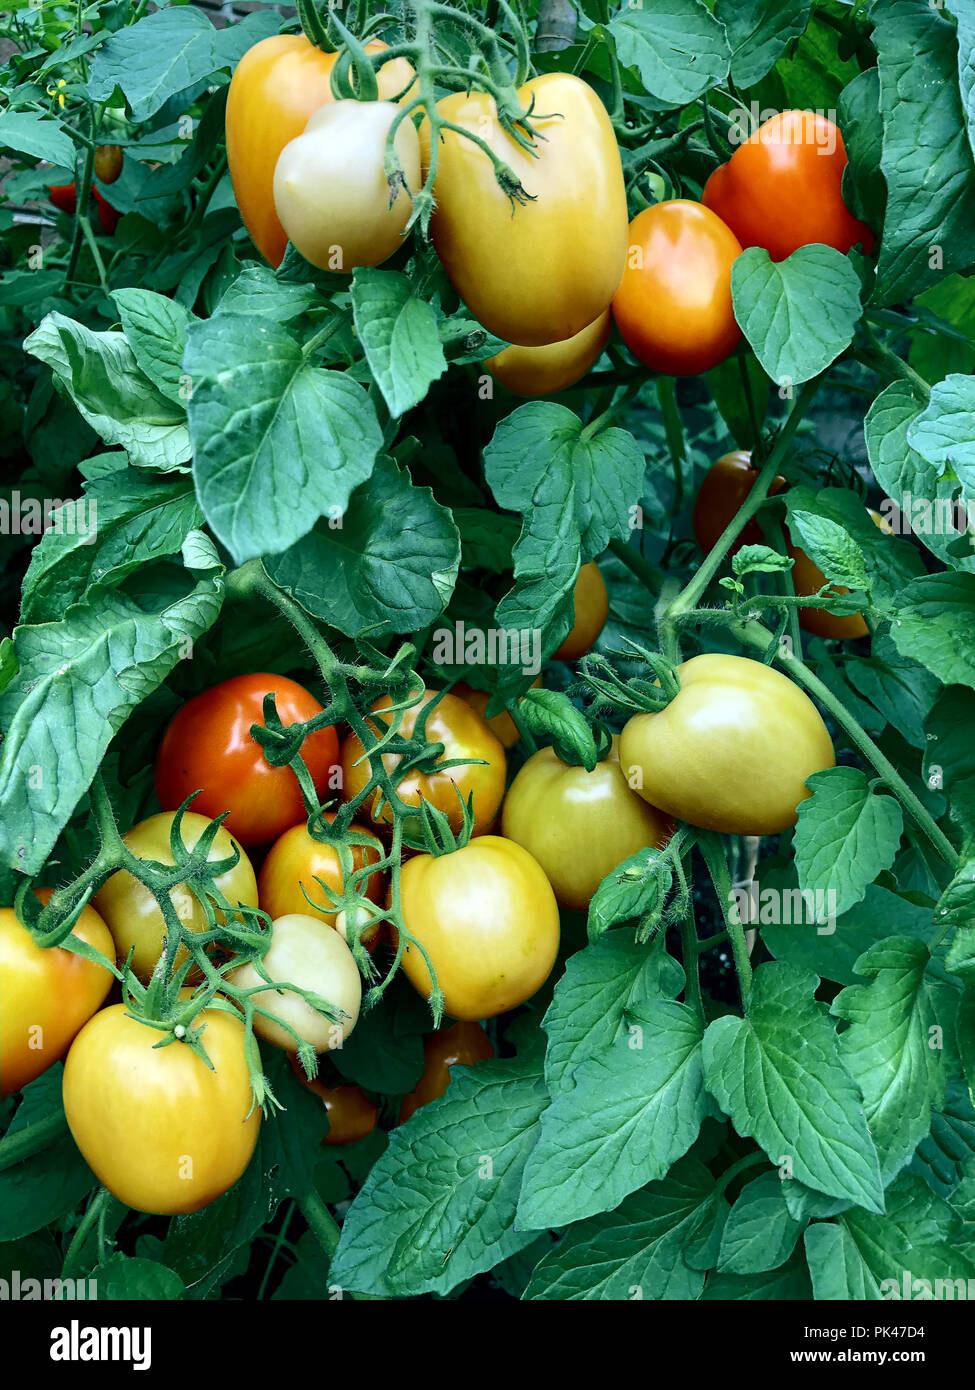 Tomato plant in a greenhouse farm or garden as a health food ingredient as an antioxidant with lycopene fruit or culinary vegetable. Stock Photo